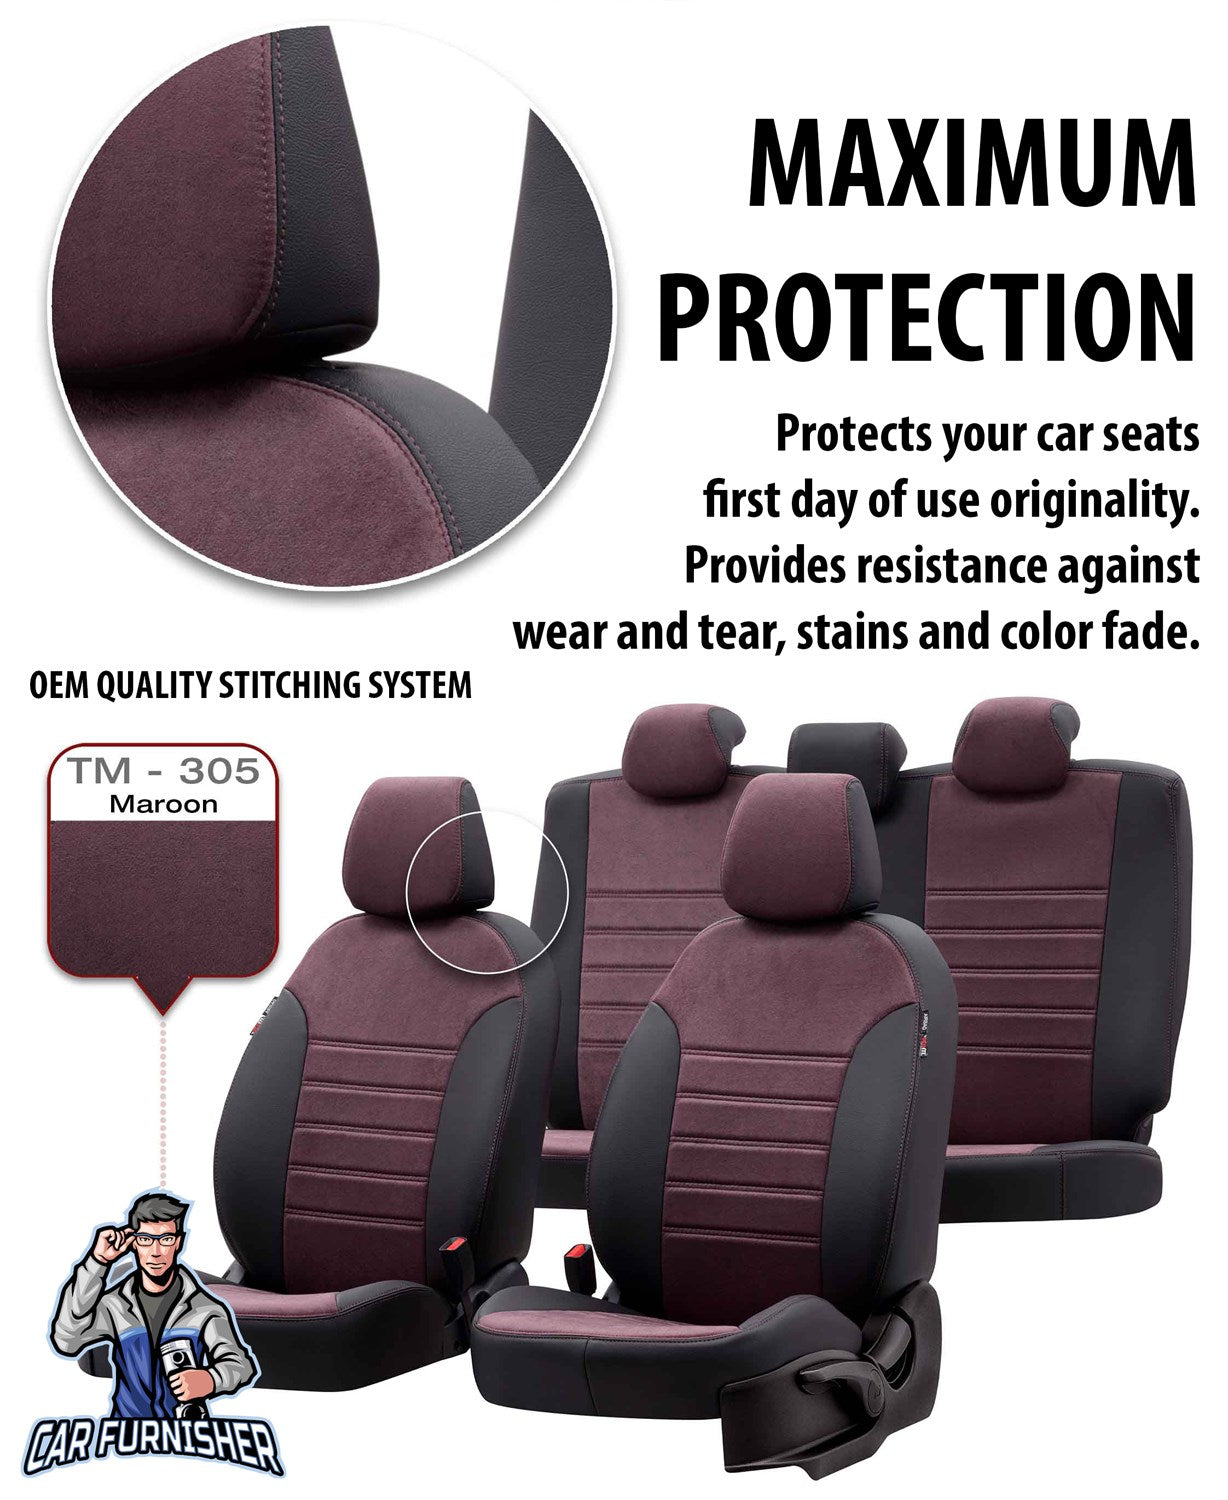 Seat Alhambra Seat Covers Milano Suede Design Burgundy Leather & Suede Fabric